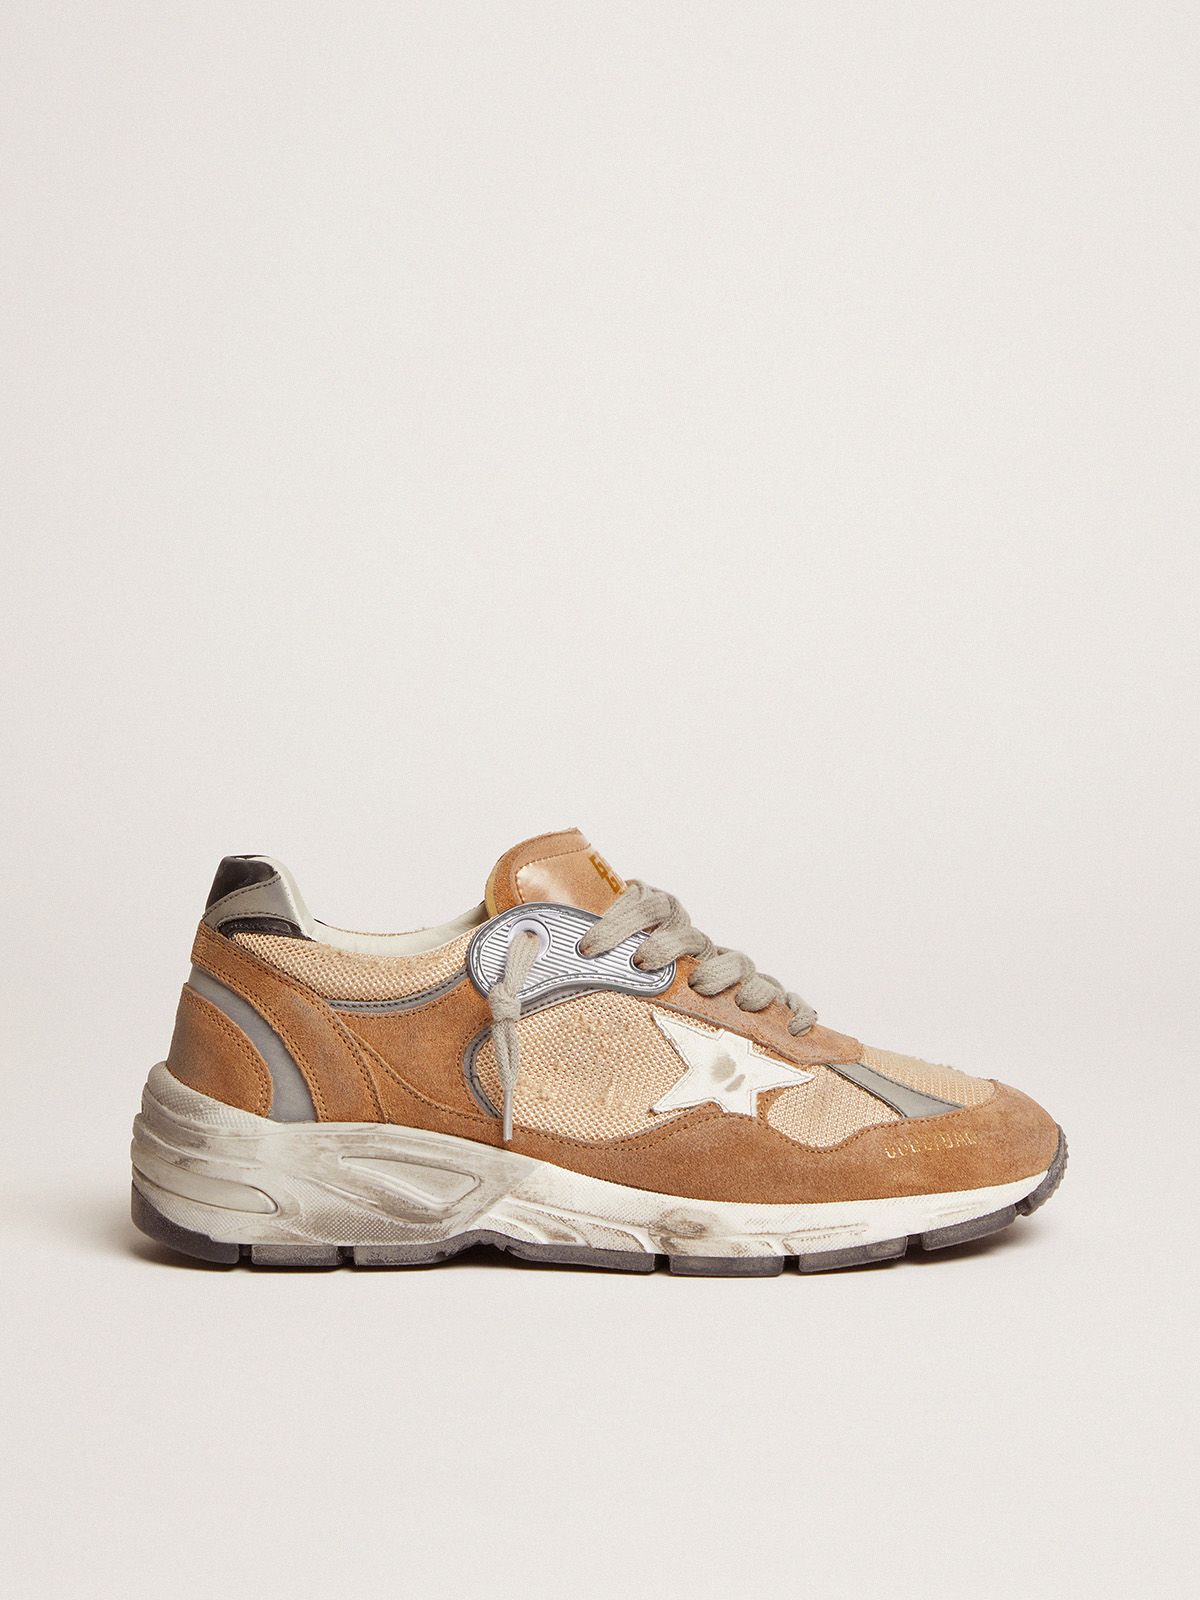 golden goose in star sneakers leather black suede heel white and Dad-Star tab with tobacco-colored mesh